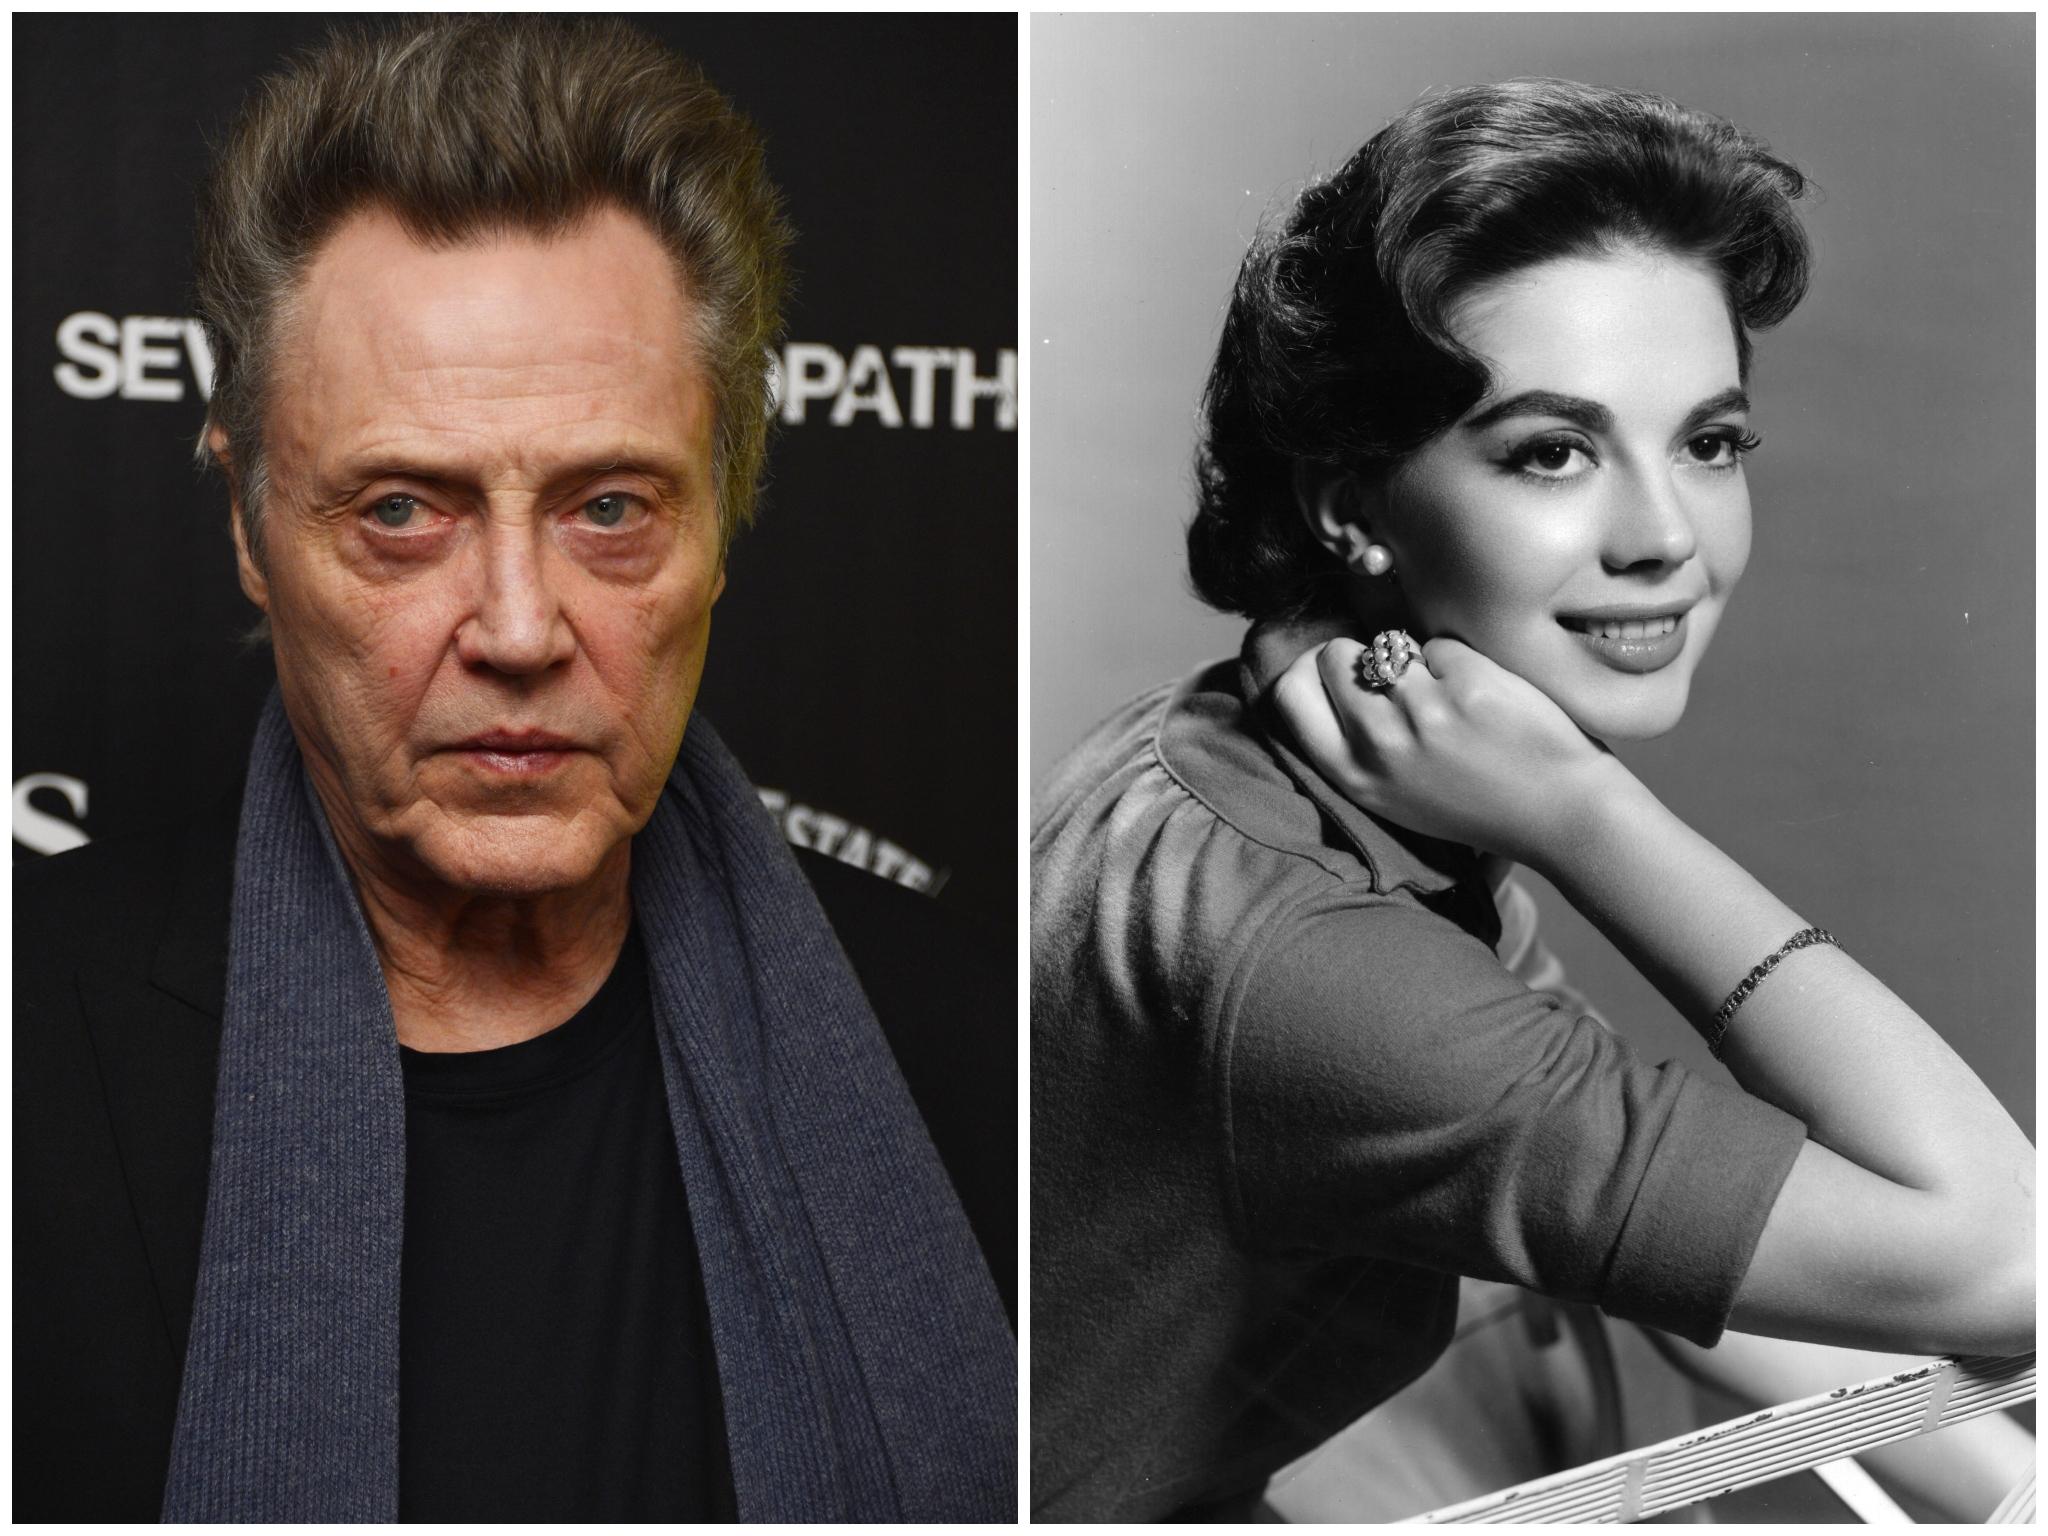 ‘What happened that night only she knows, because she was alone,’ Christopher Walken said of Wood’s tragic death in 1997